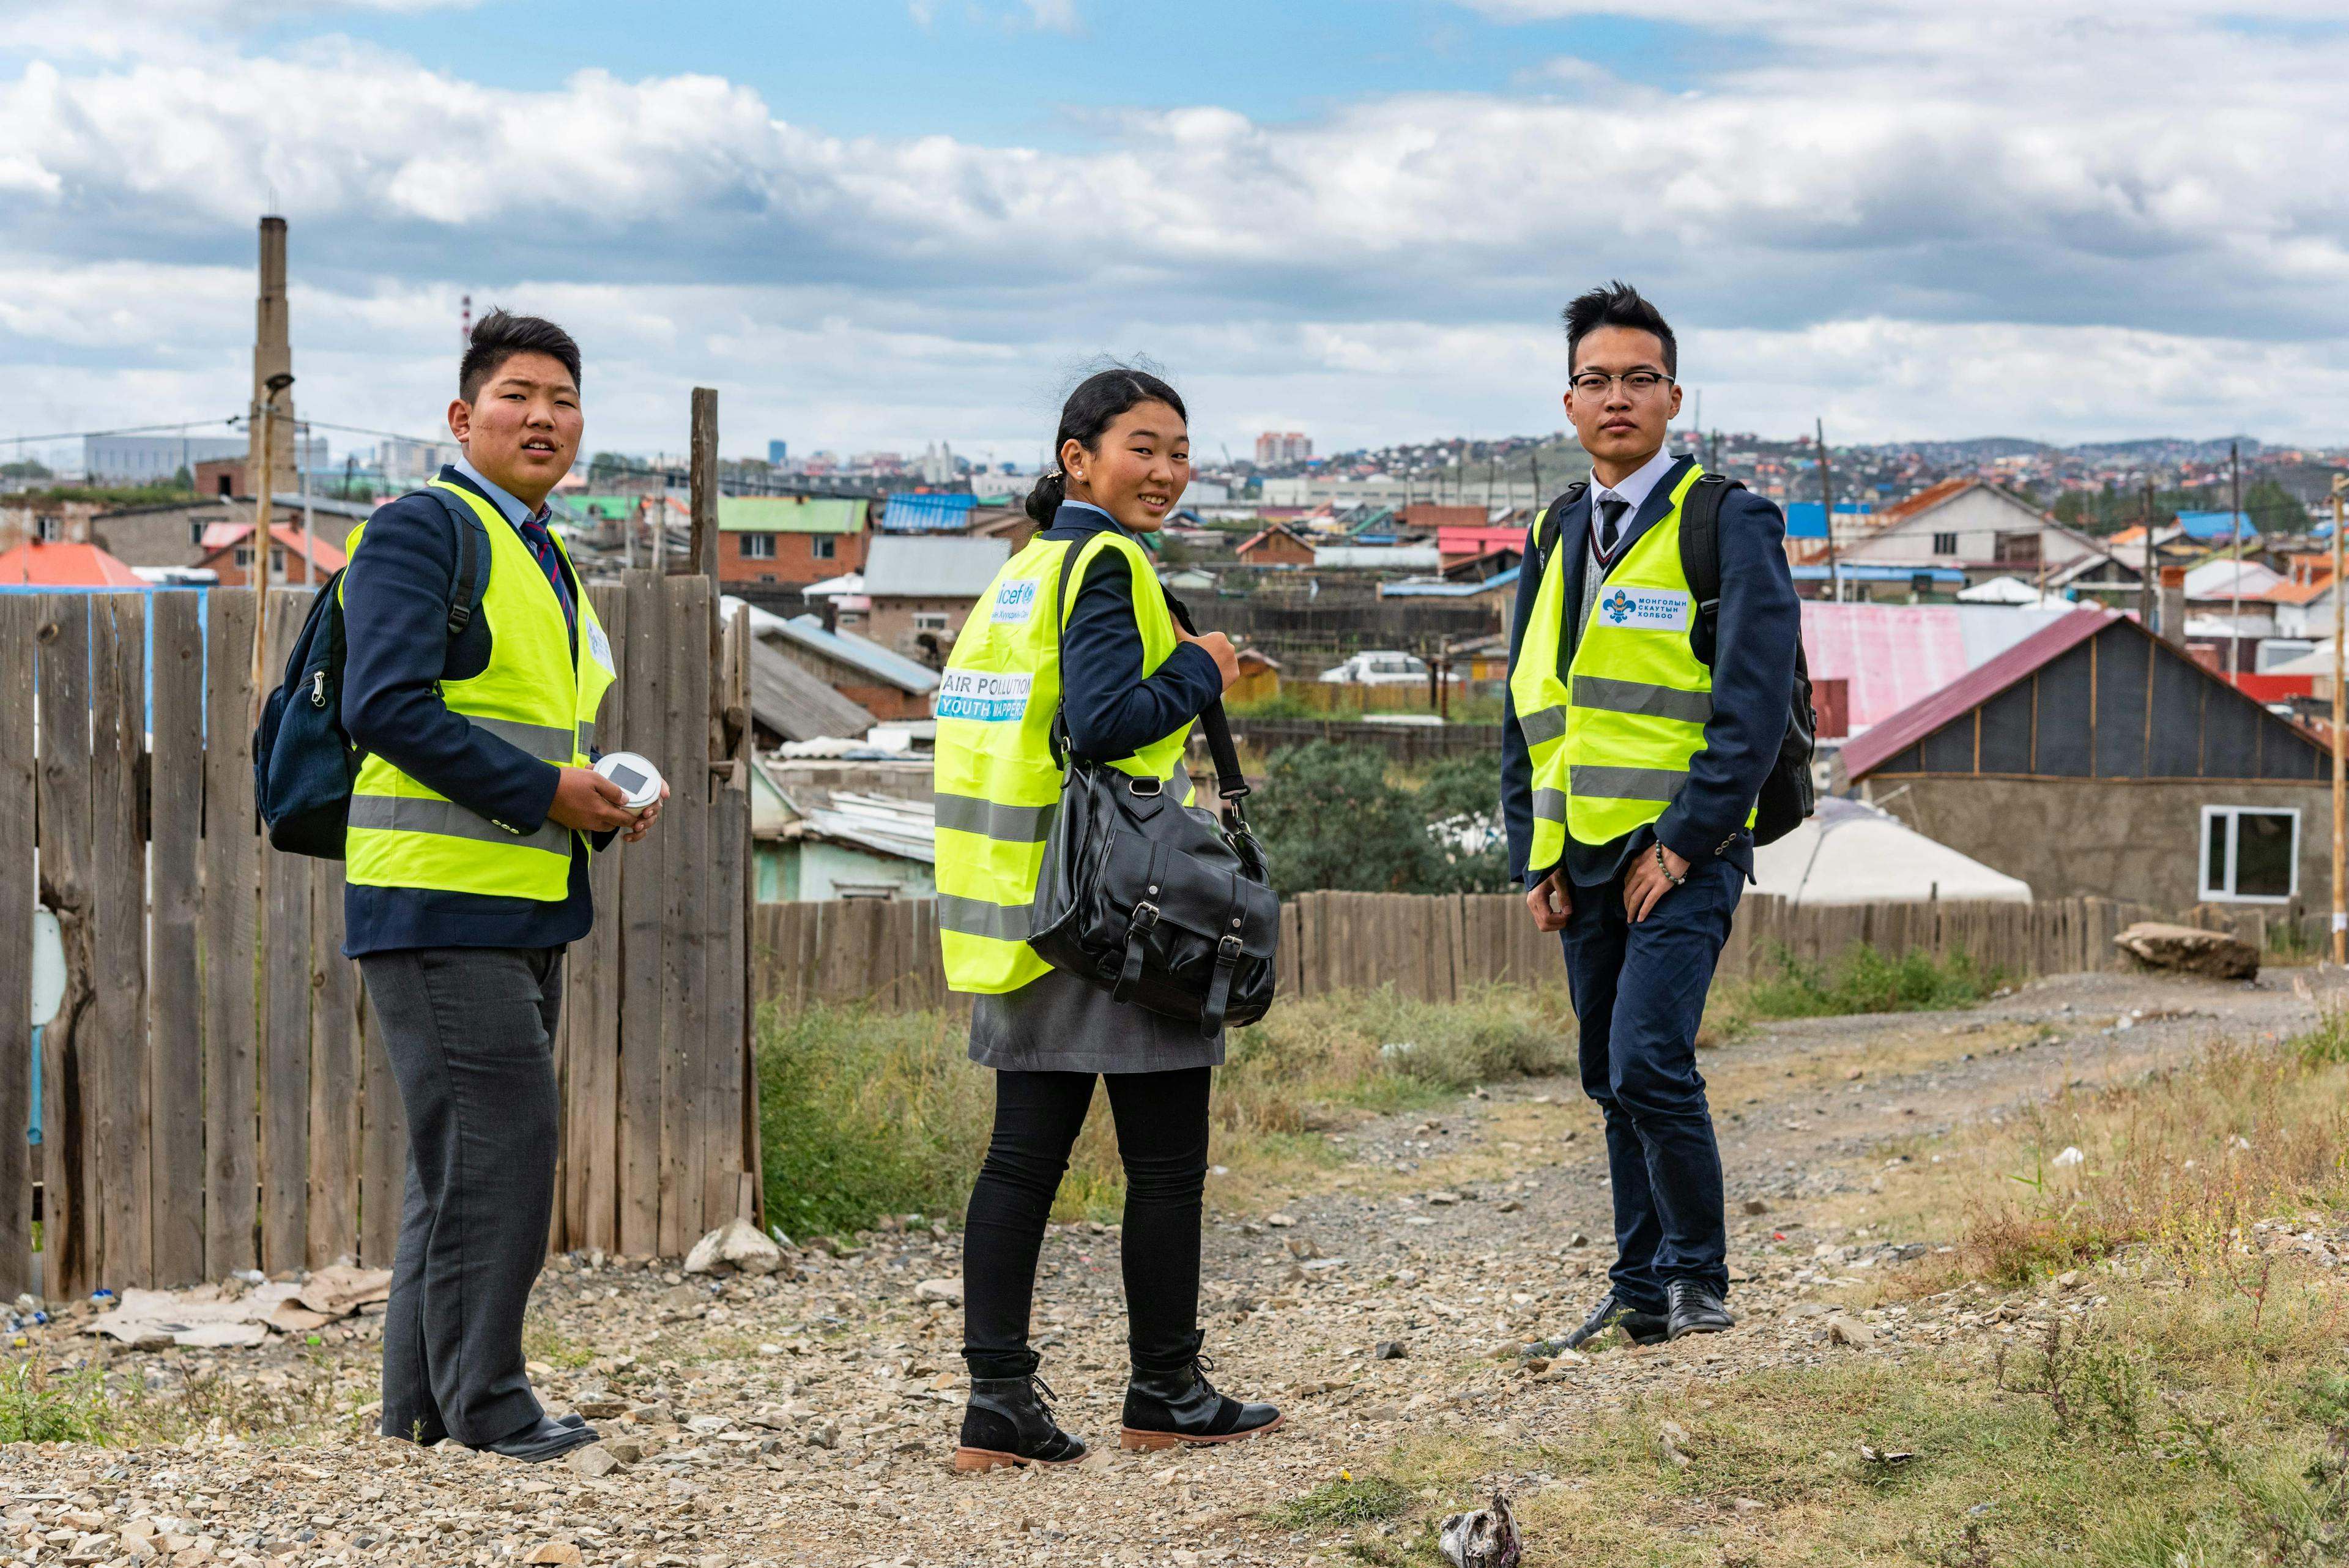 Health & Medicine- Adolescents collecting air pollution data in the outskirts of Ulaanbaatar, Mongolia, as part of the “Programme Air Pollution Youth Mappers”. 